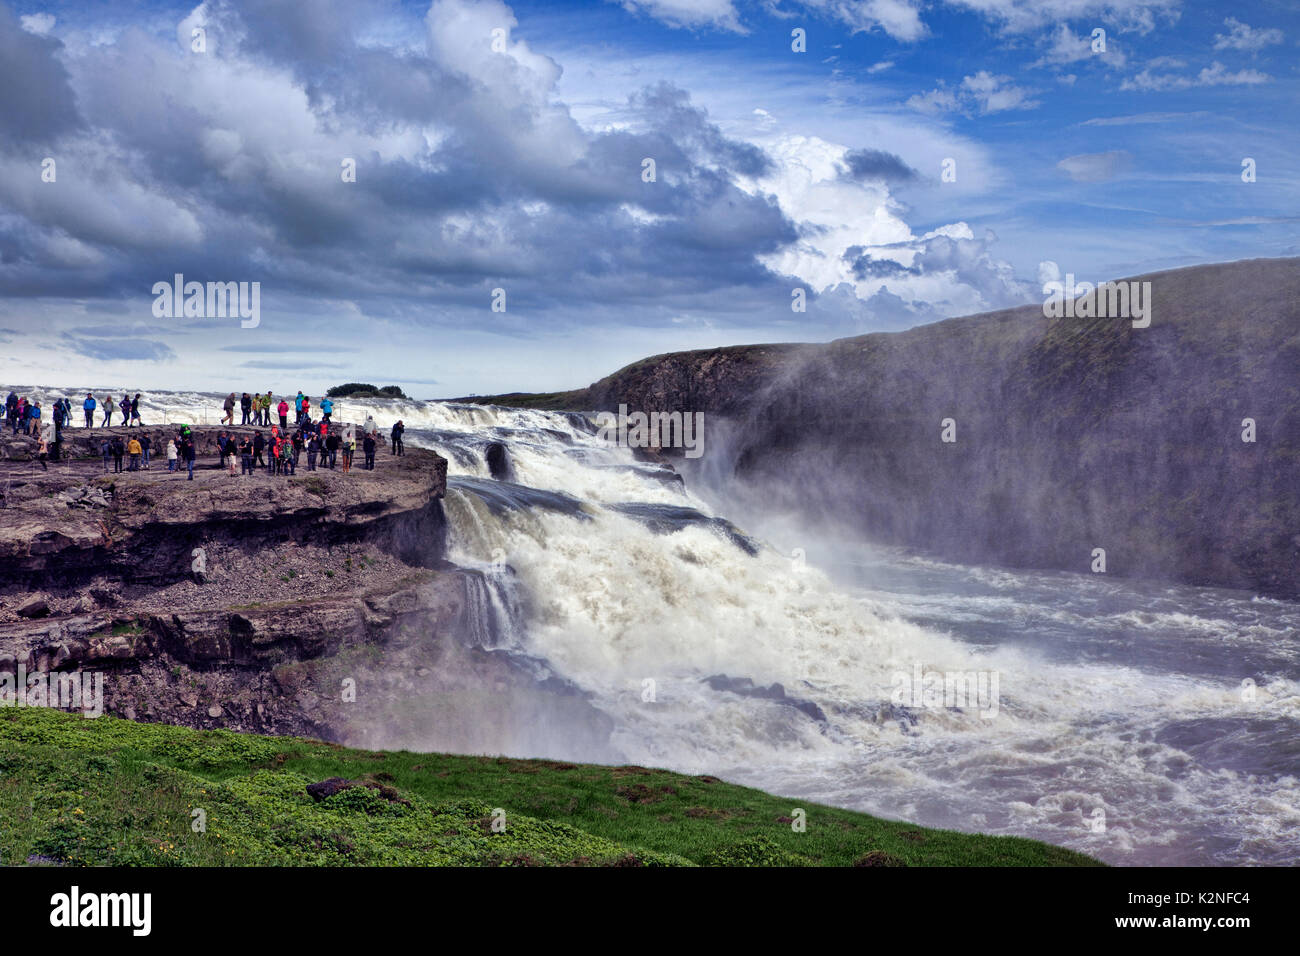 Upper view of Gullfoss waterfall with a rainbow in Iceland. Stock Photo